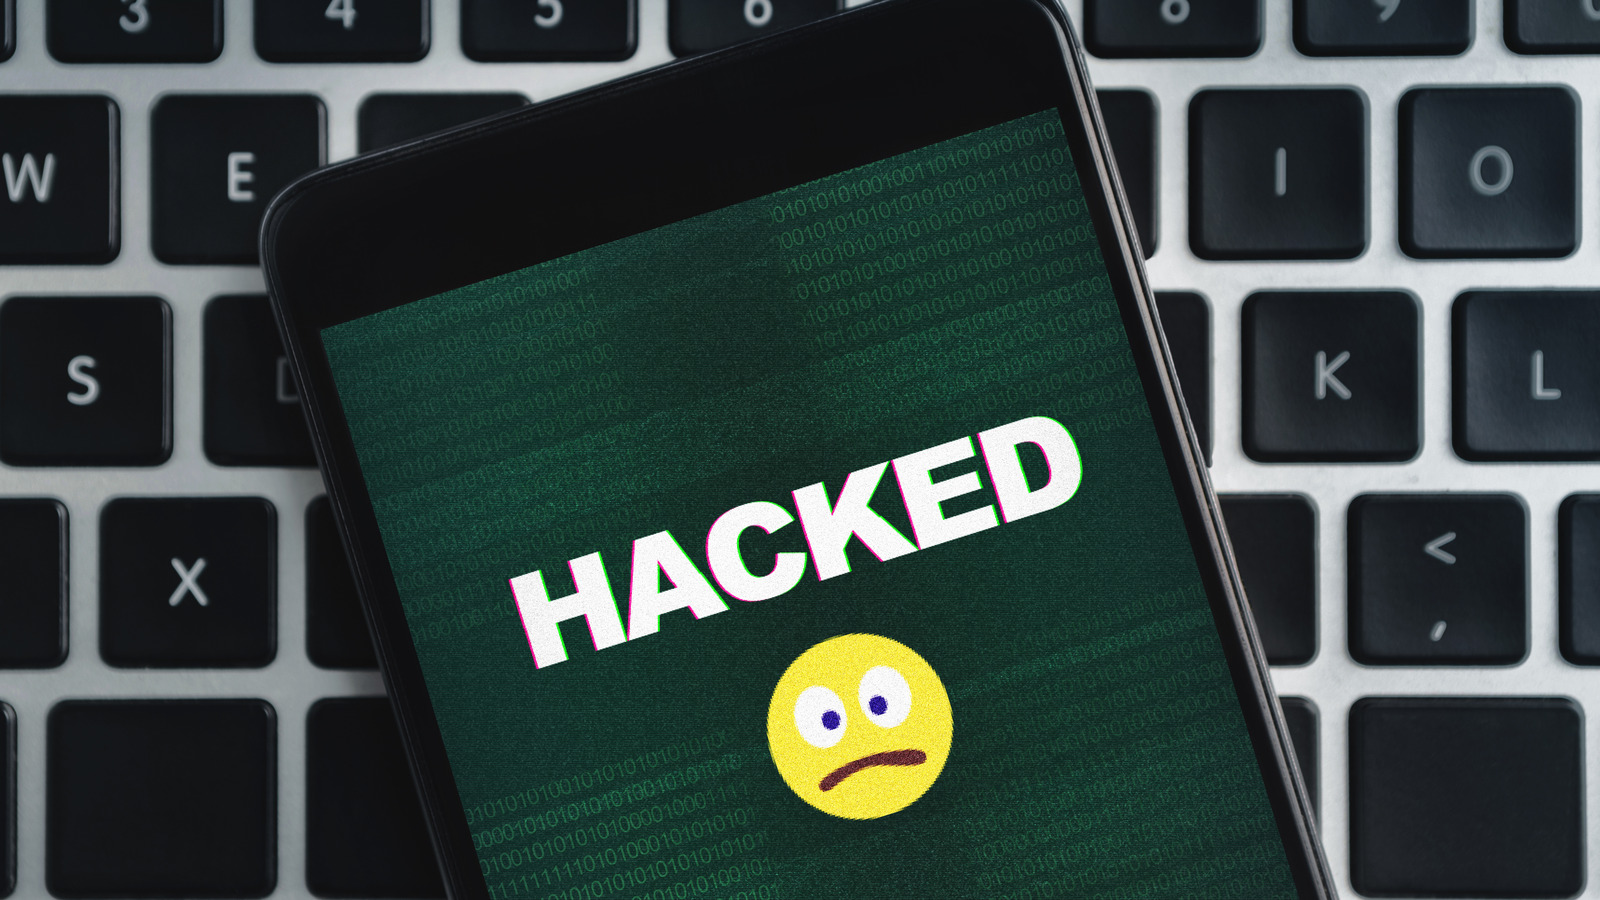 What To Do If Your Android Phone Has Been Hacked